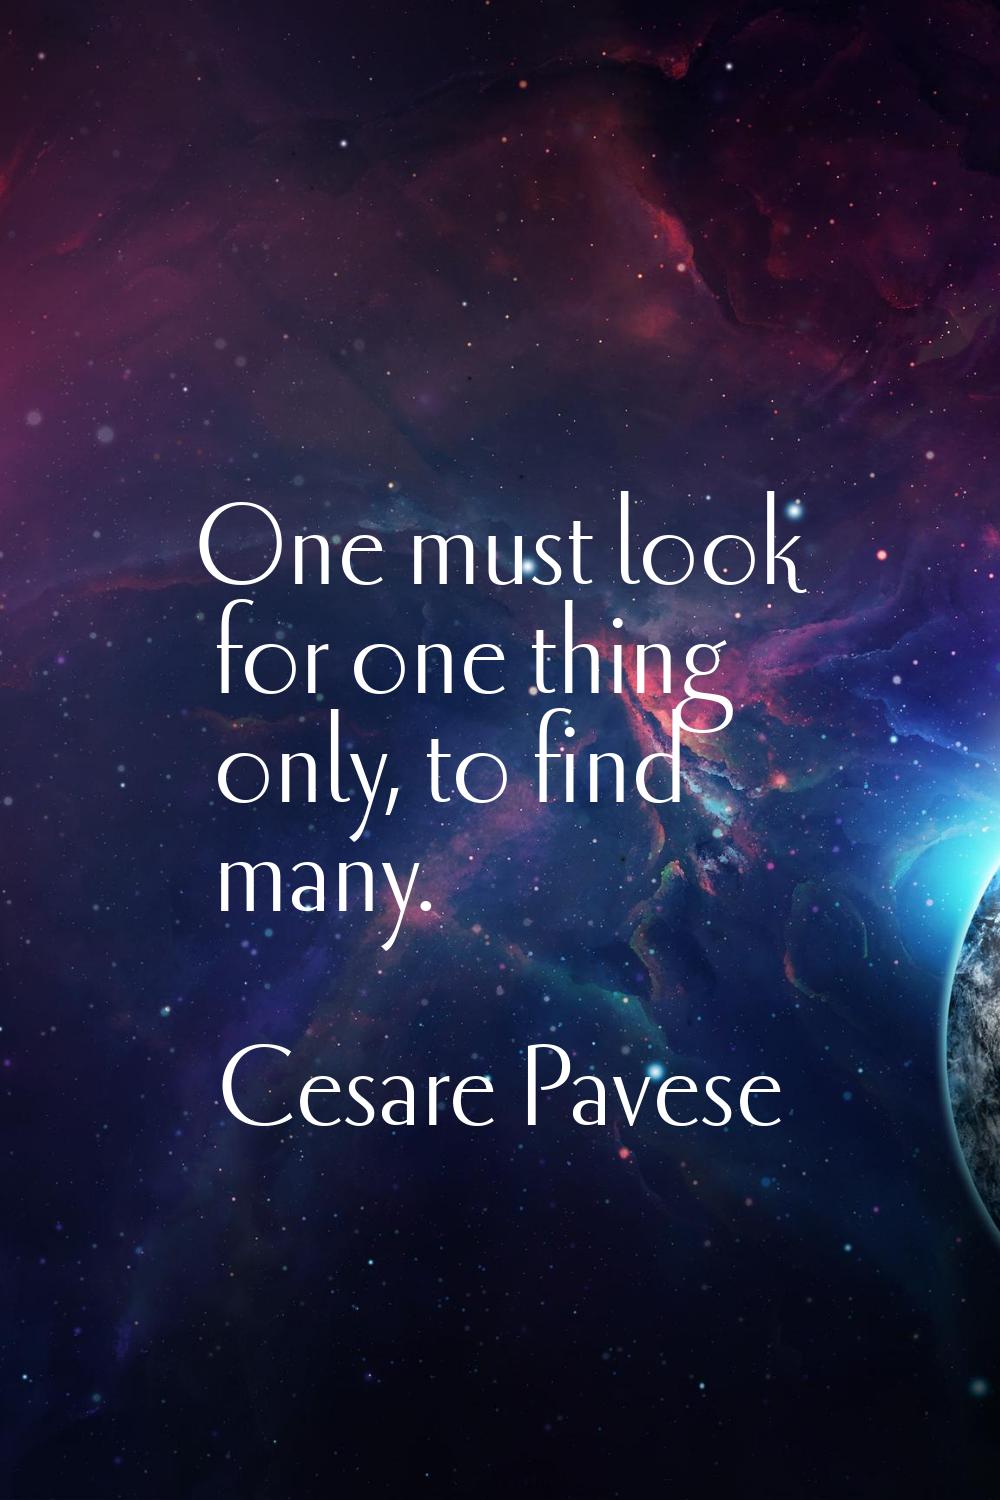 One must look for one thing only, to find many.